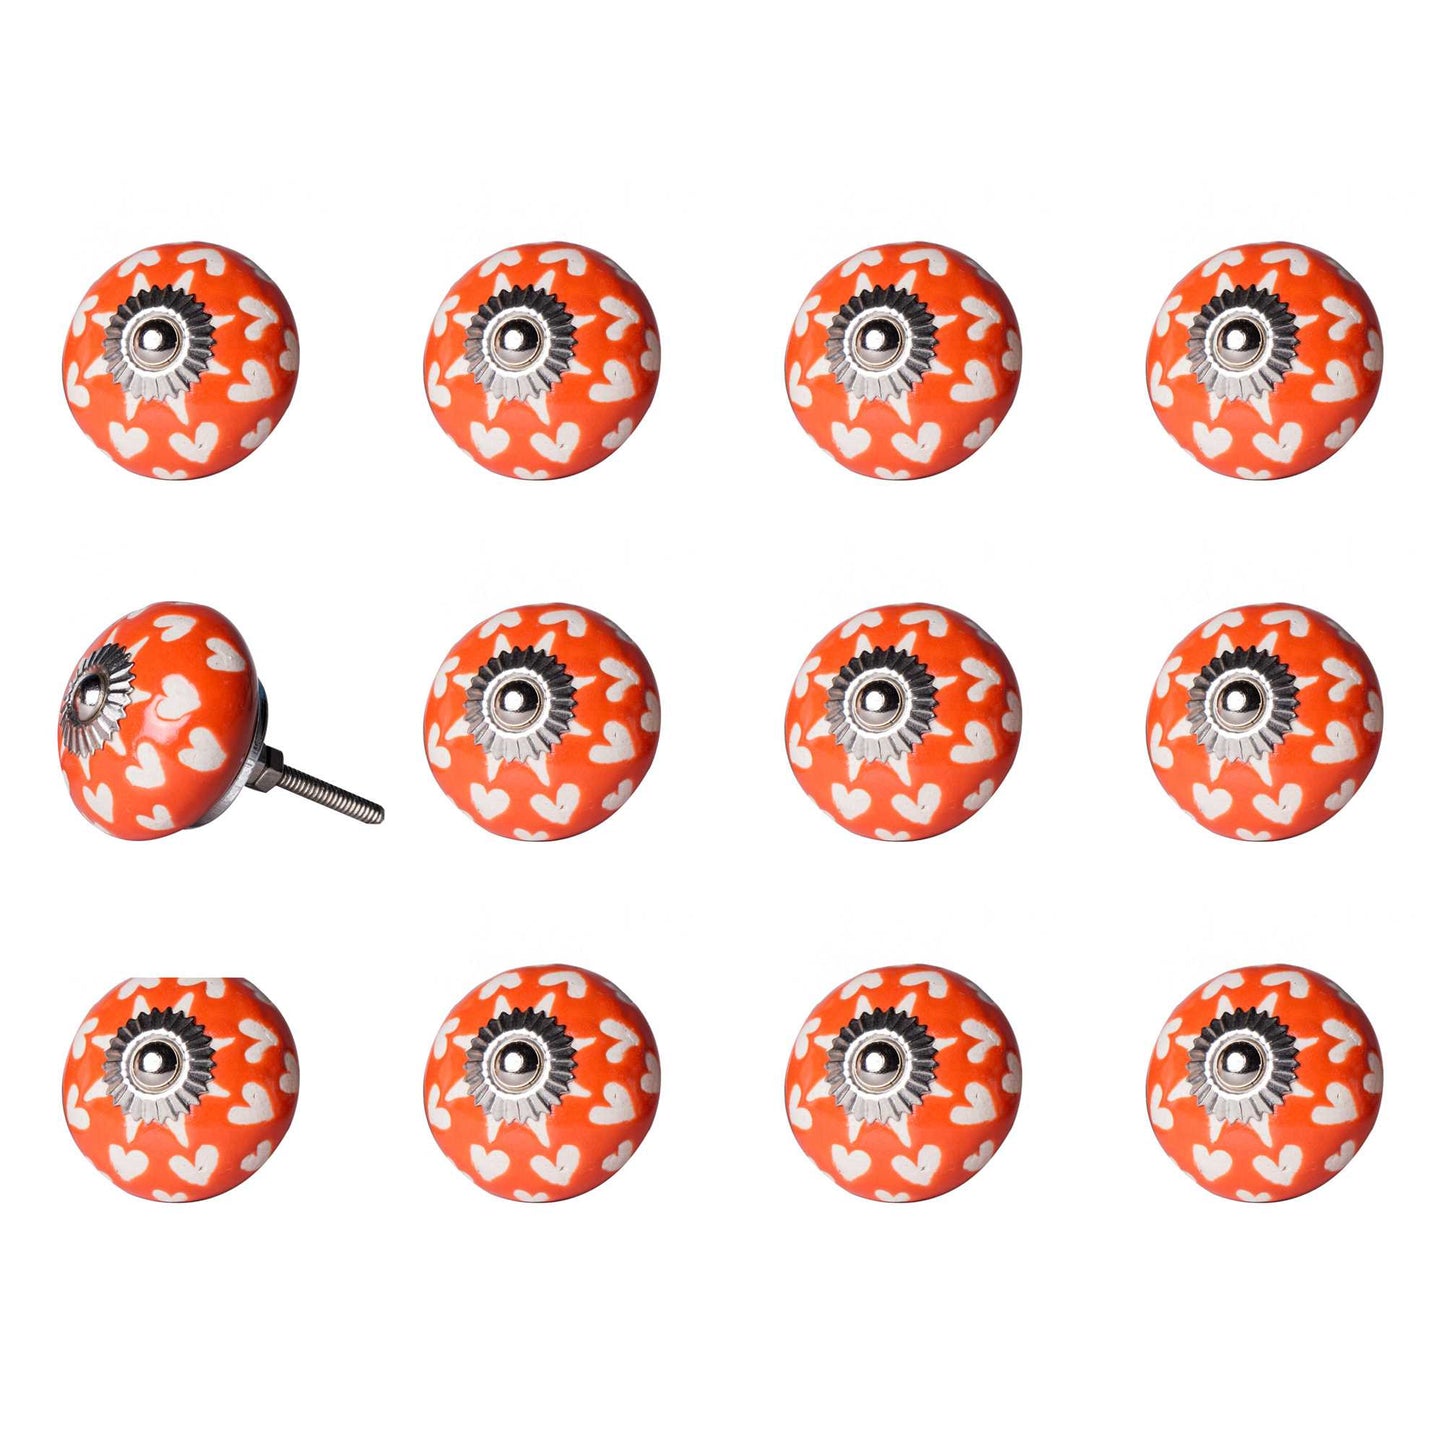 1.5" X 1.5" X 1.5" Orange White And Silver  Knobs 12 Pack